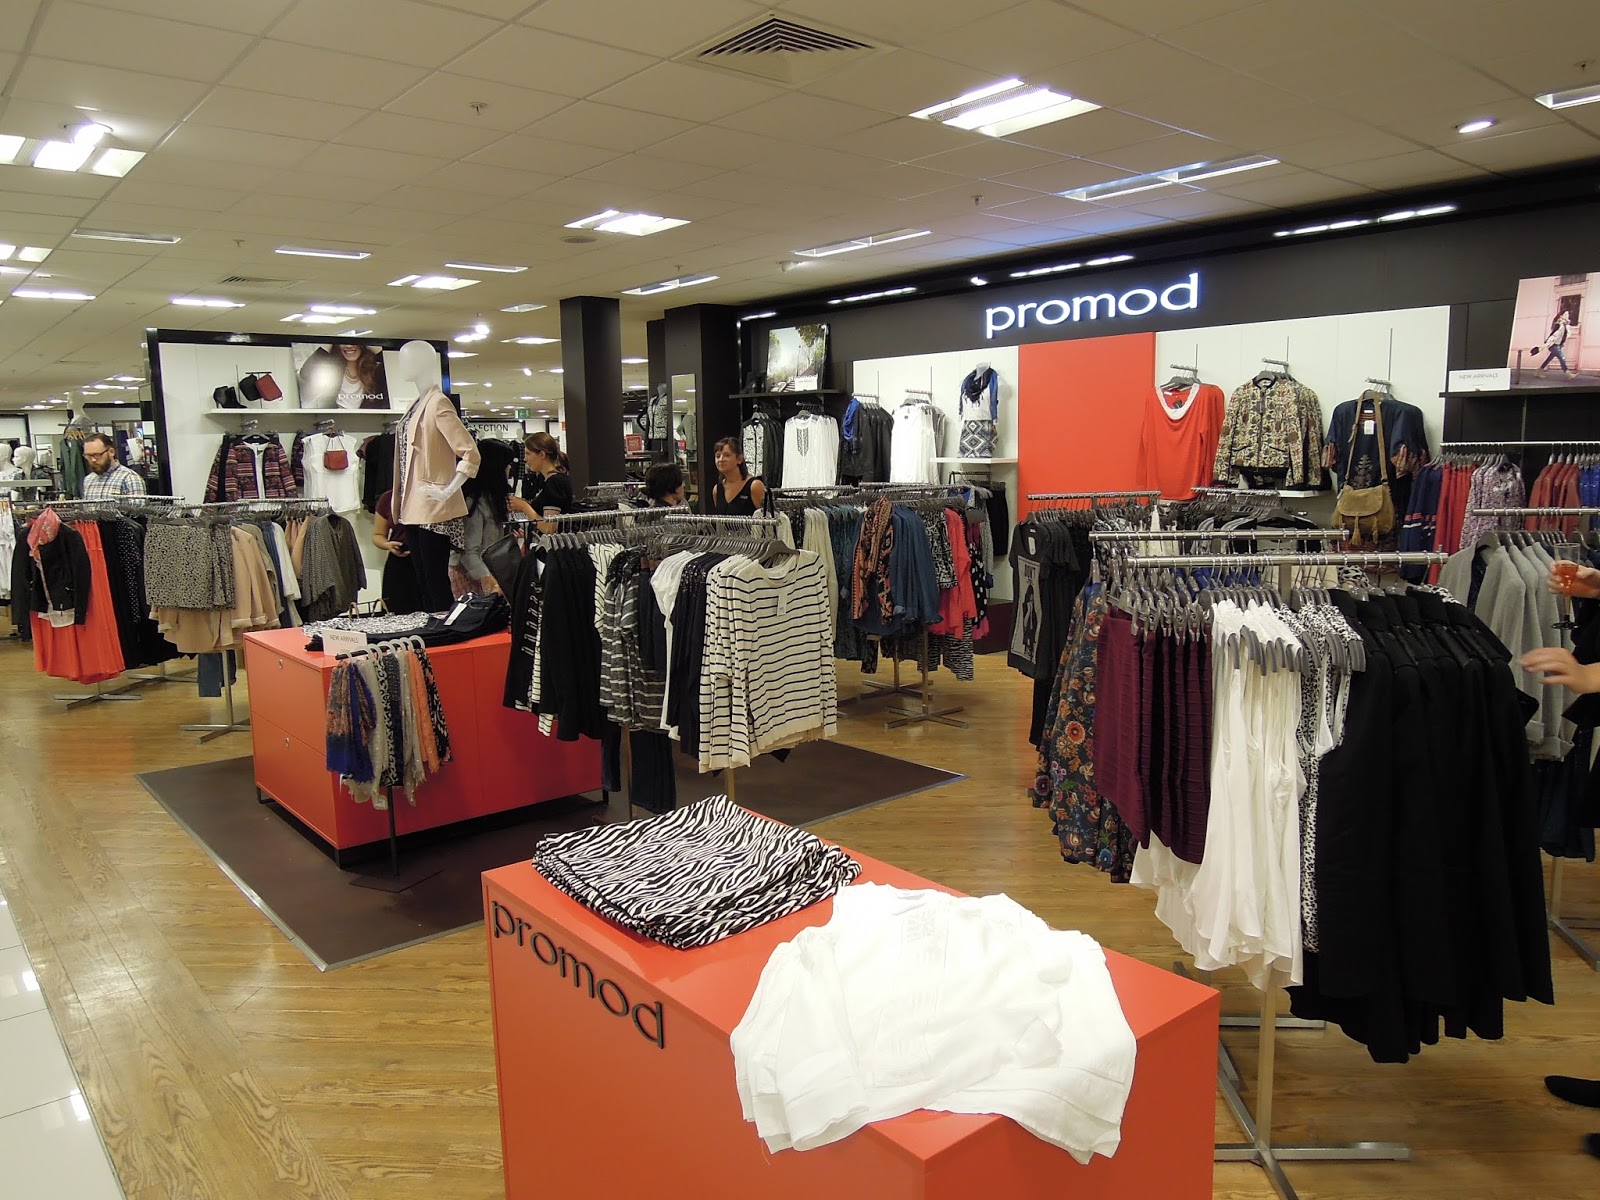 This is their store in Debenhams in Cardiff